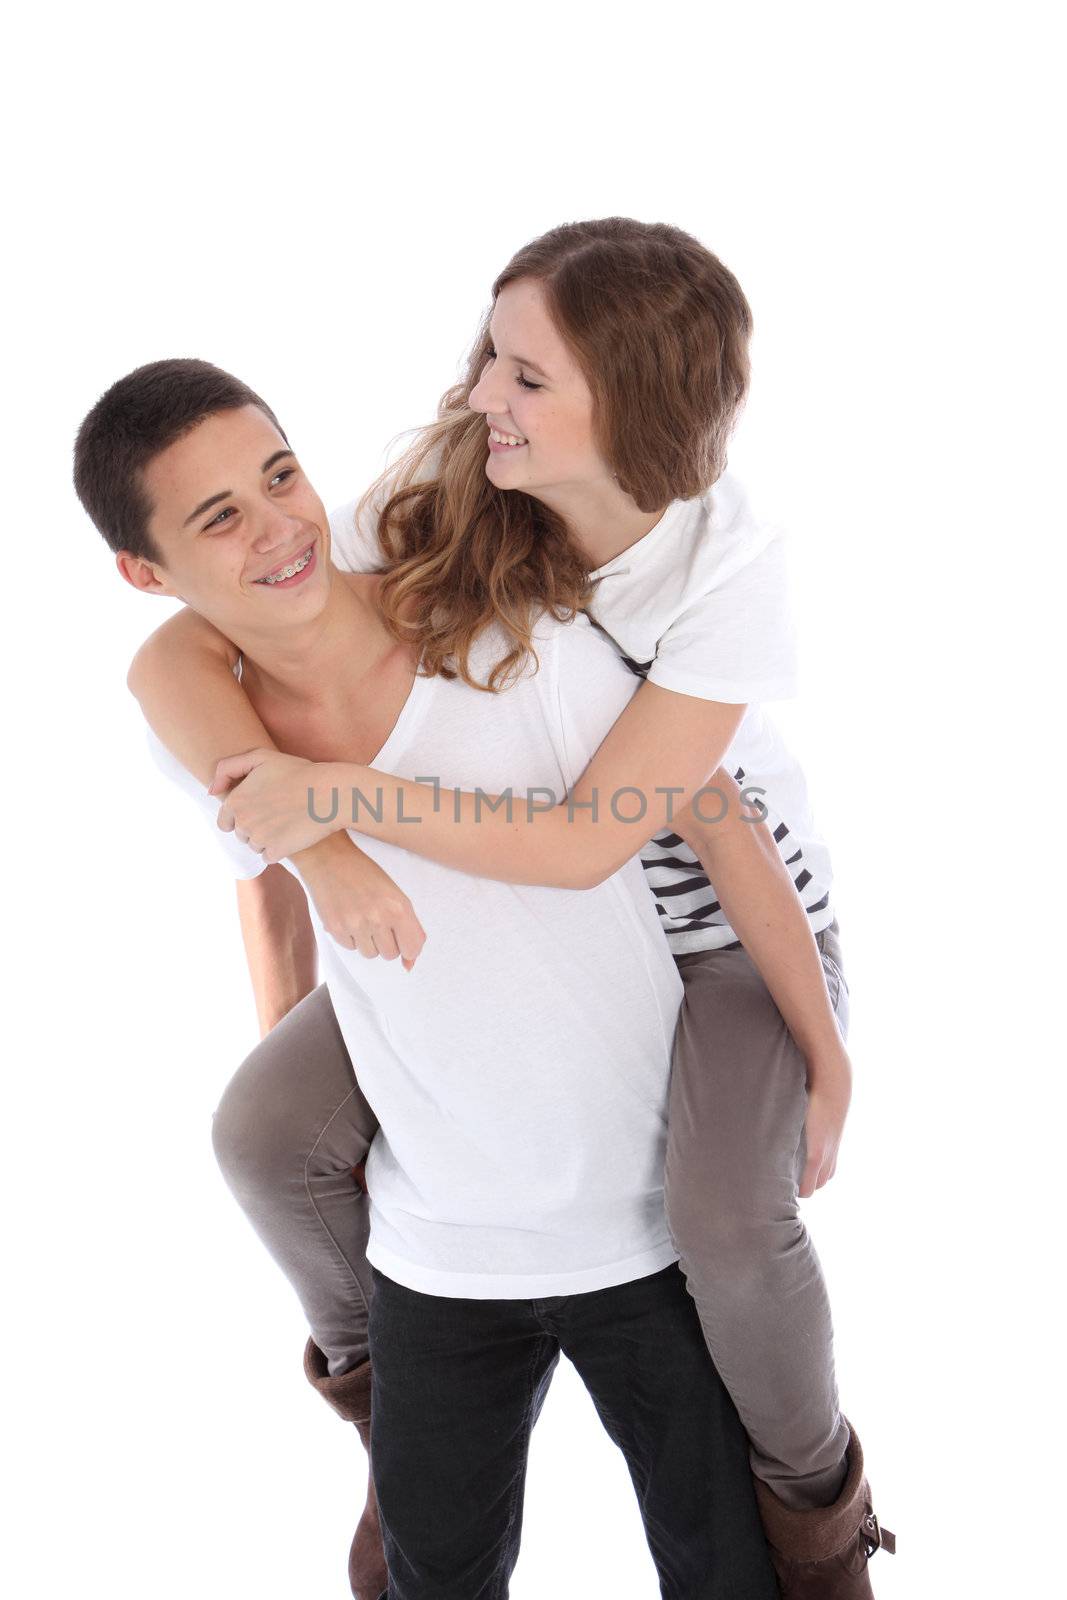 Young attractive teenage boy giving his laughing girlfriend a piggyback ride as they enjoy some fun time together isolated on white